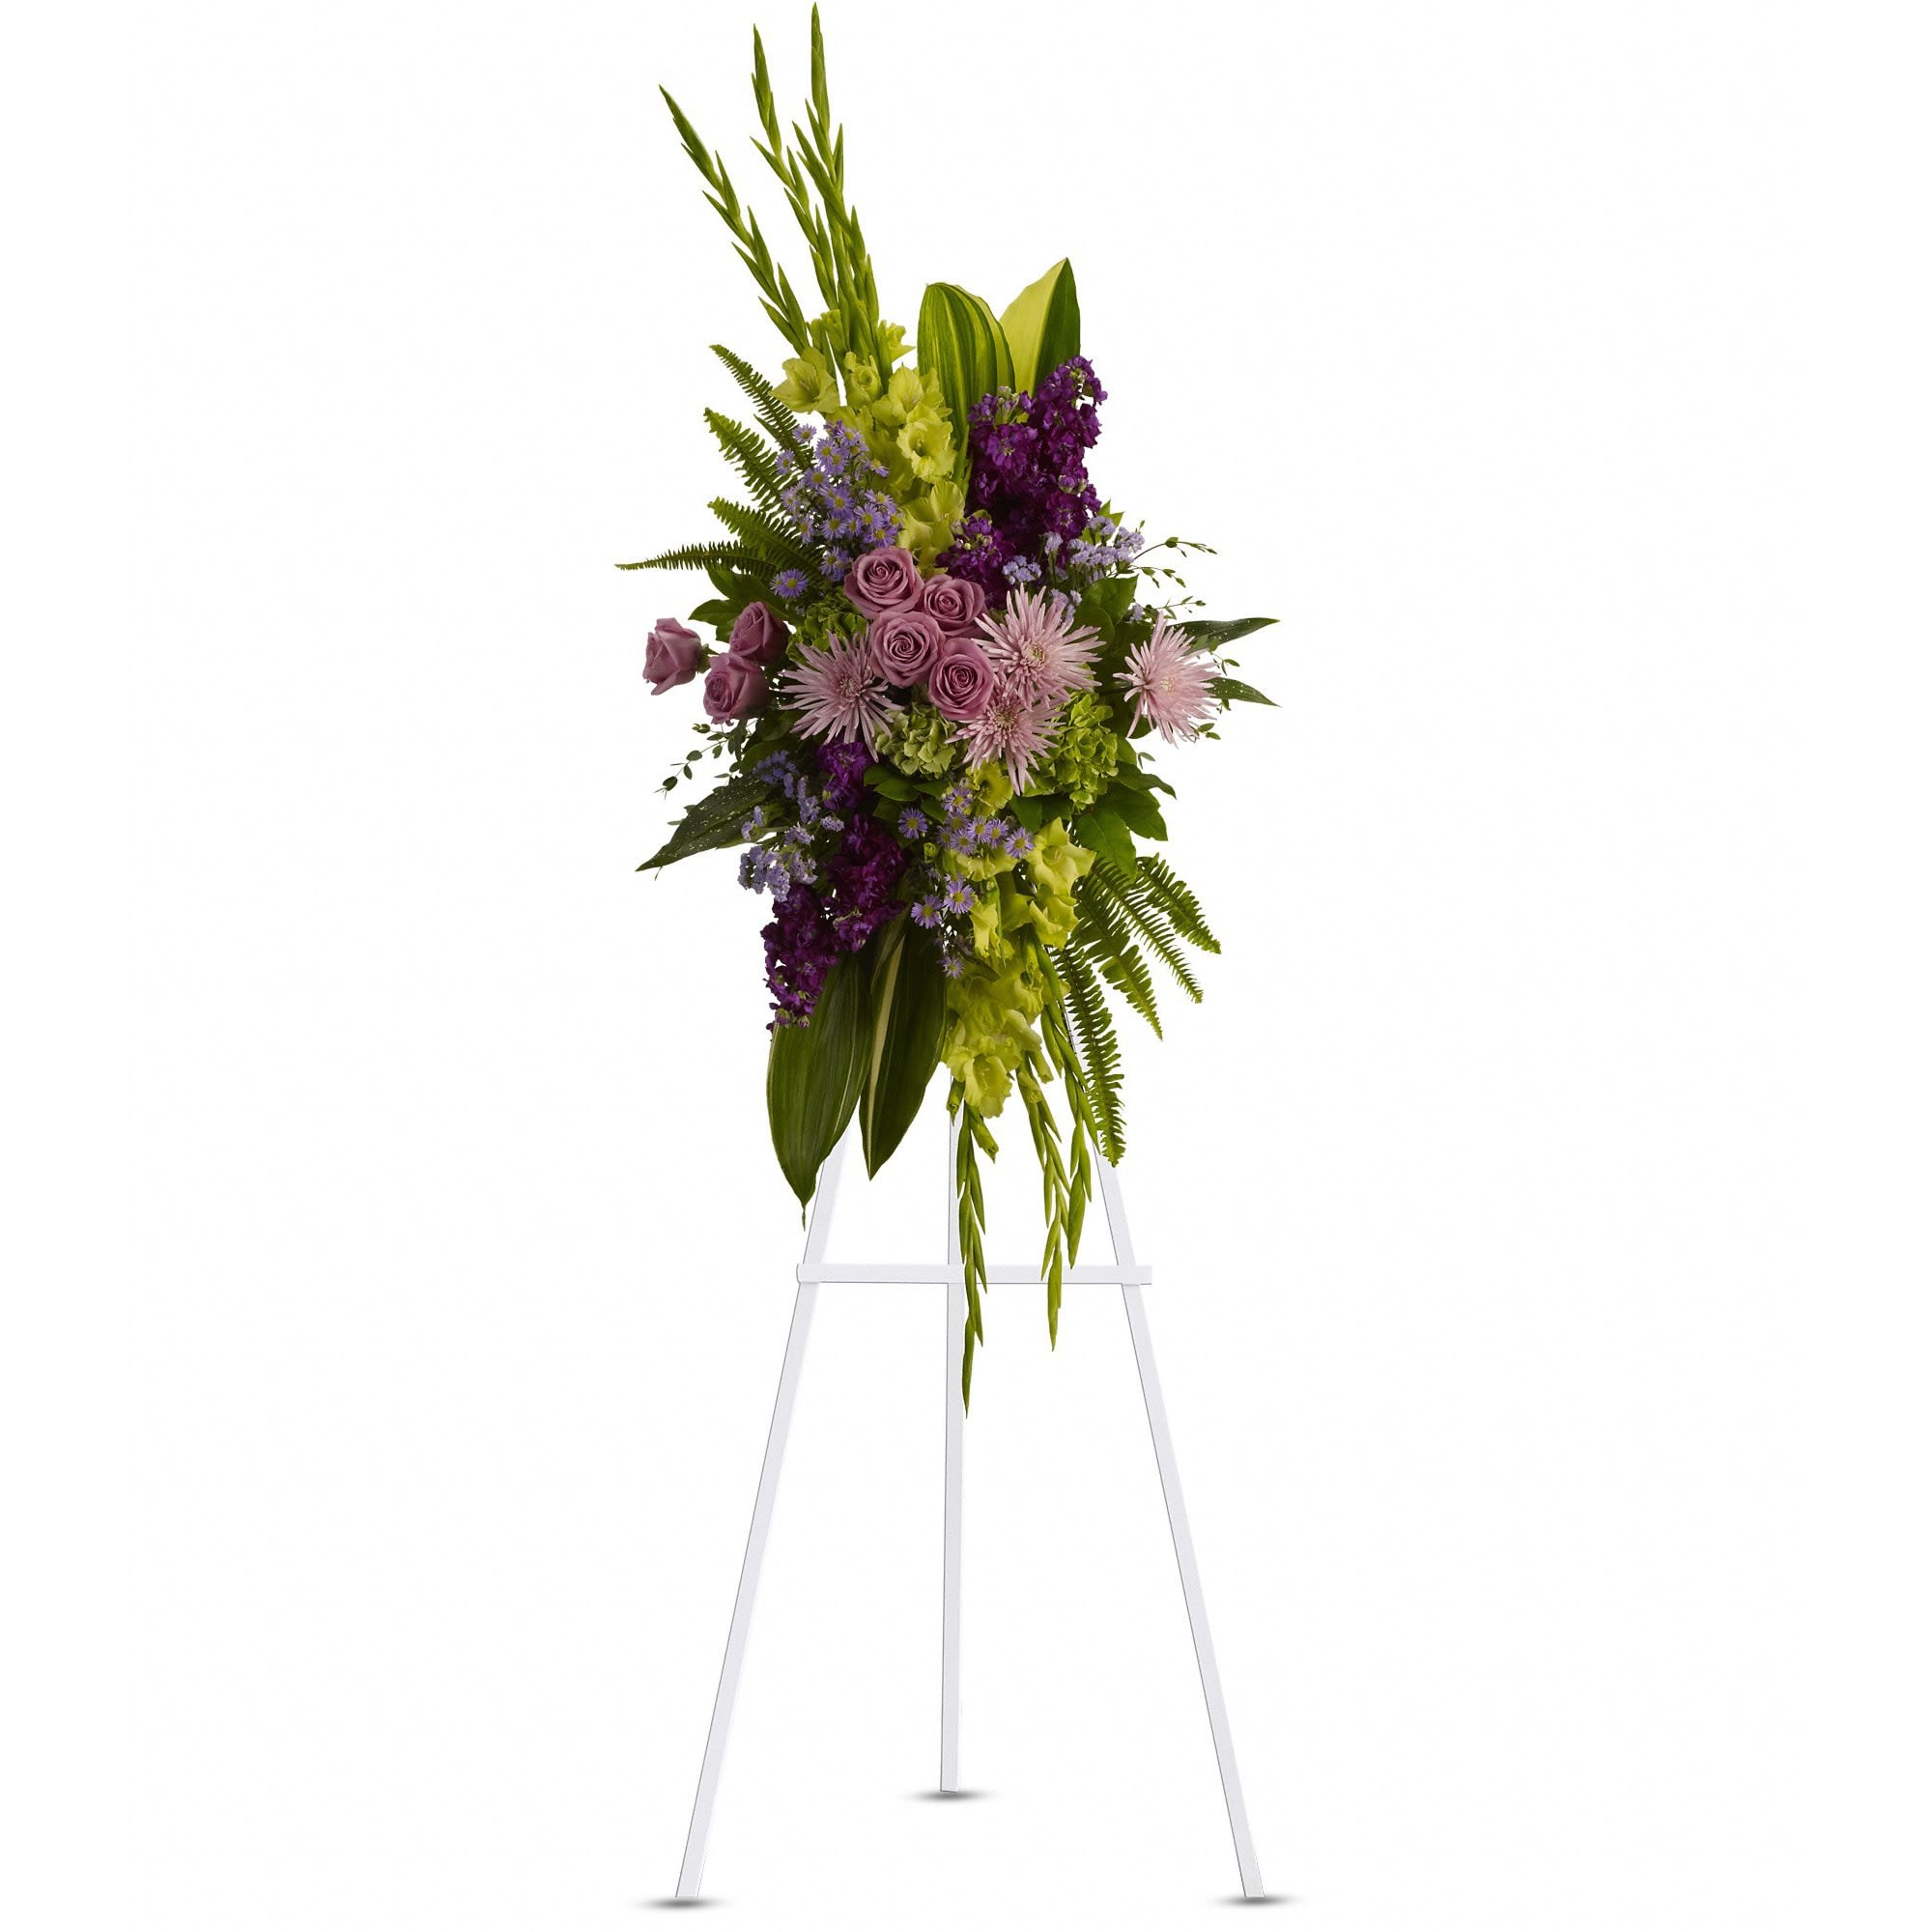 The Endless Sky Spray by Teleflora - Lavender blooms and lush velvet greenery evoke a celebration of a life well lived.  